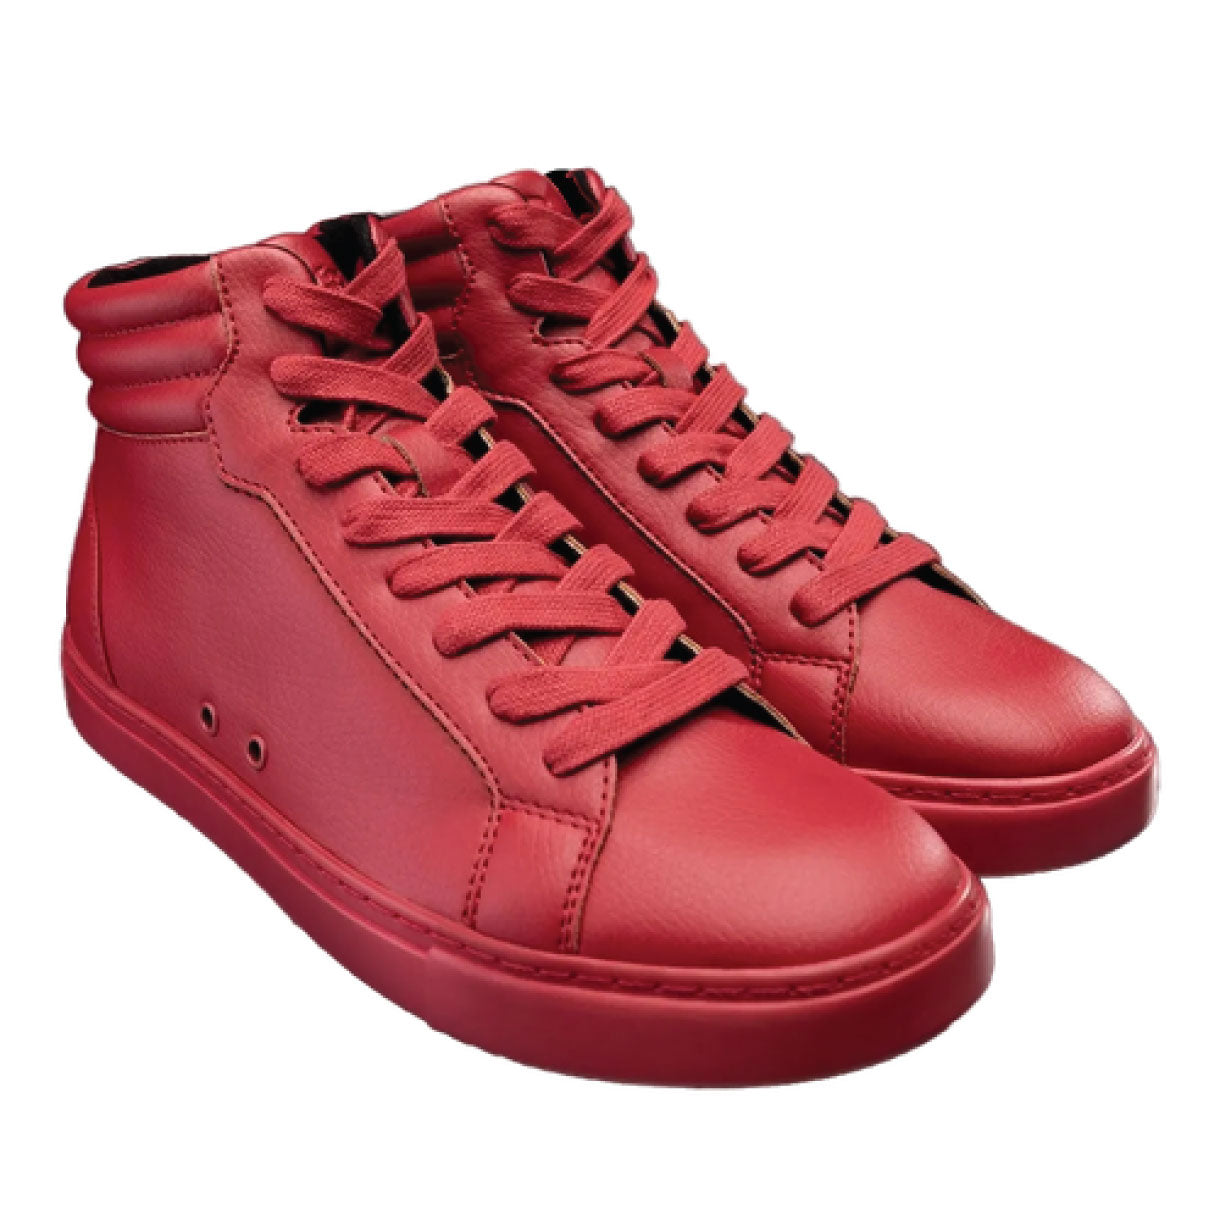 Fuego High-Top Dance Sneakers in Rot